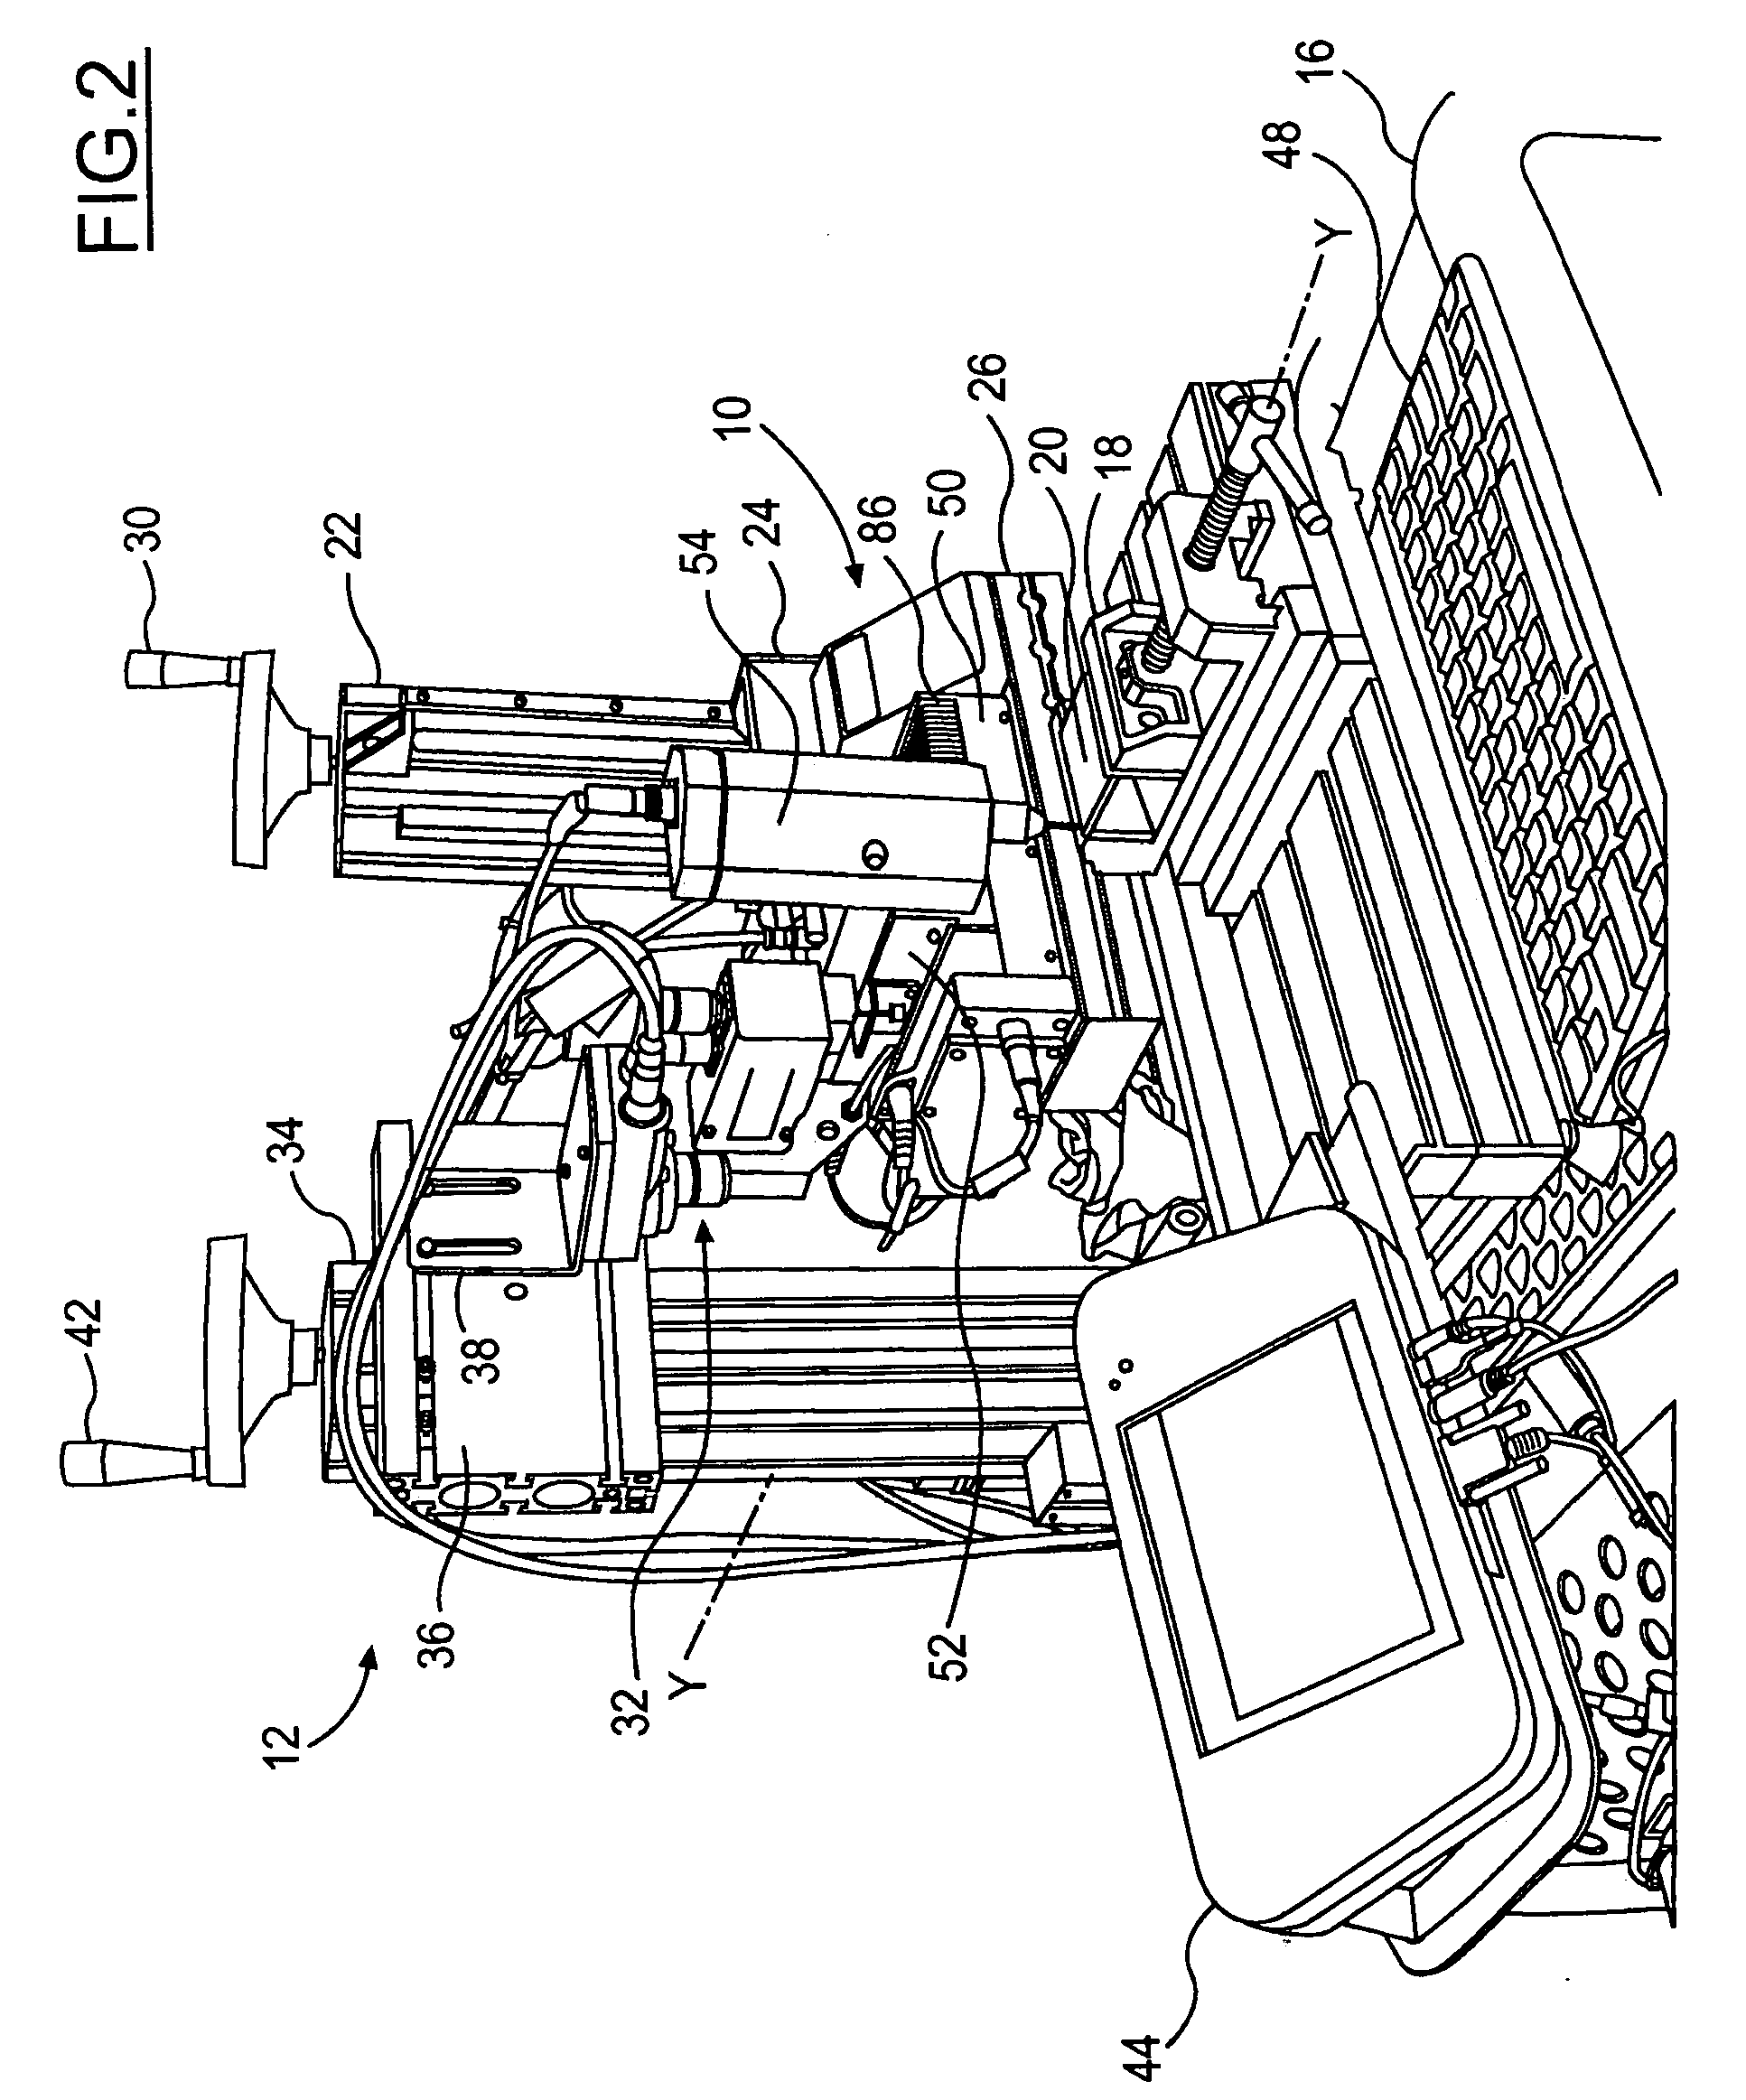 Apparatus and method for controlling a programmable marking scribe